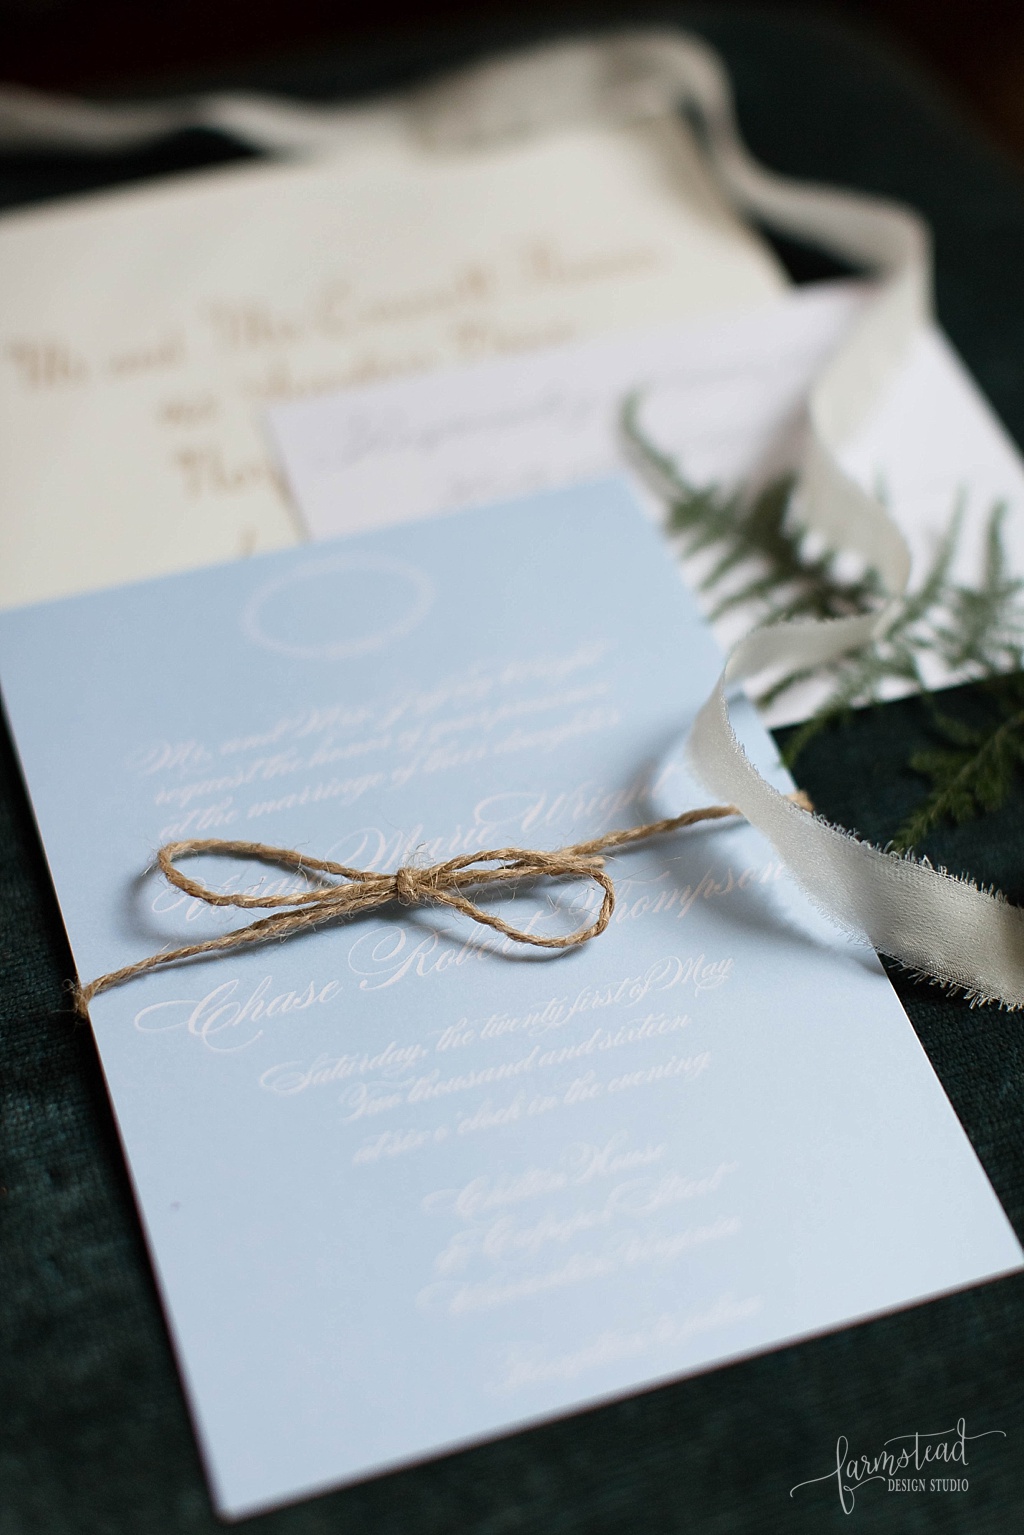 Blue + gold wedding invitation suite with gold calligraphy at historic home in Virginia for 1940's vintage wedding inspiration styled shoot by Farmstead Design Studio - www.homeonthefarmstead.com - Candice Adelle Photography